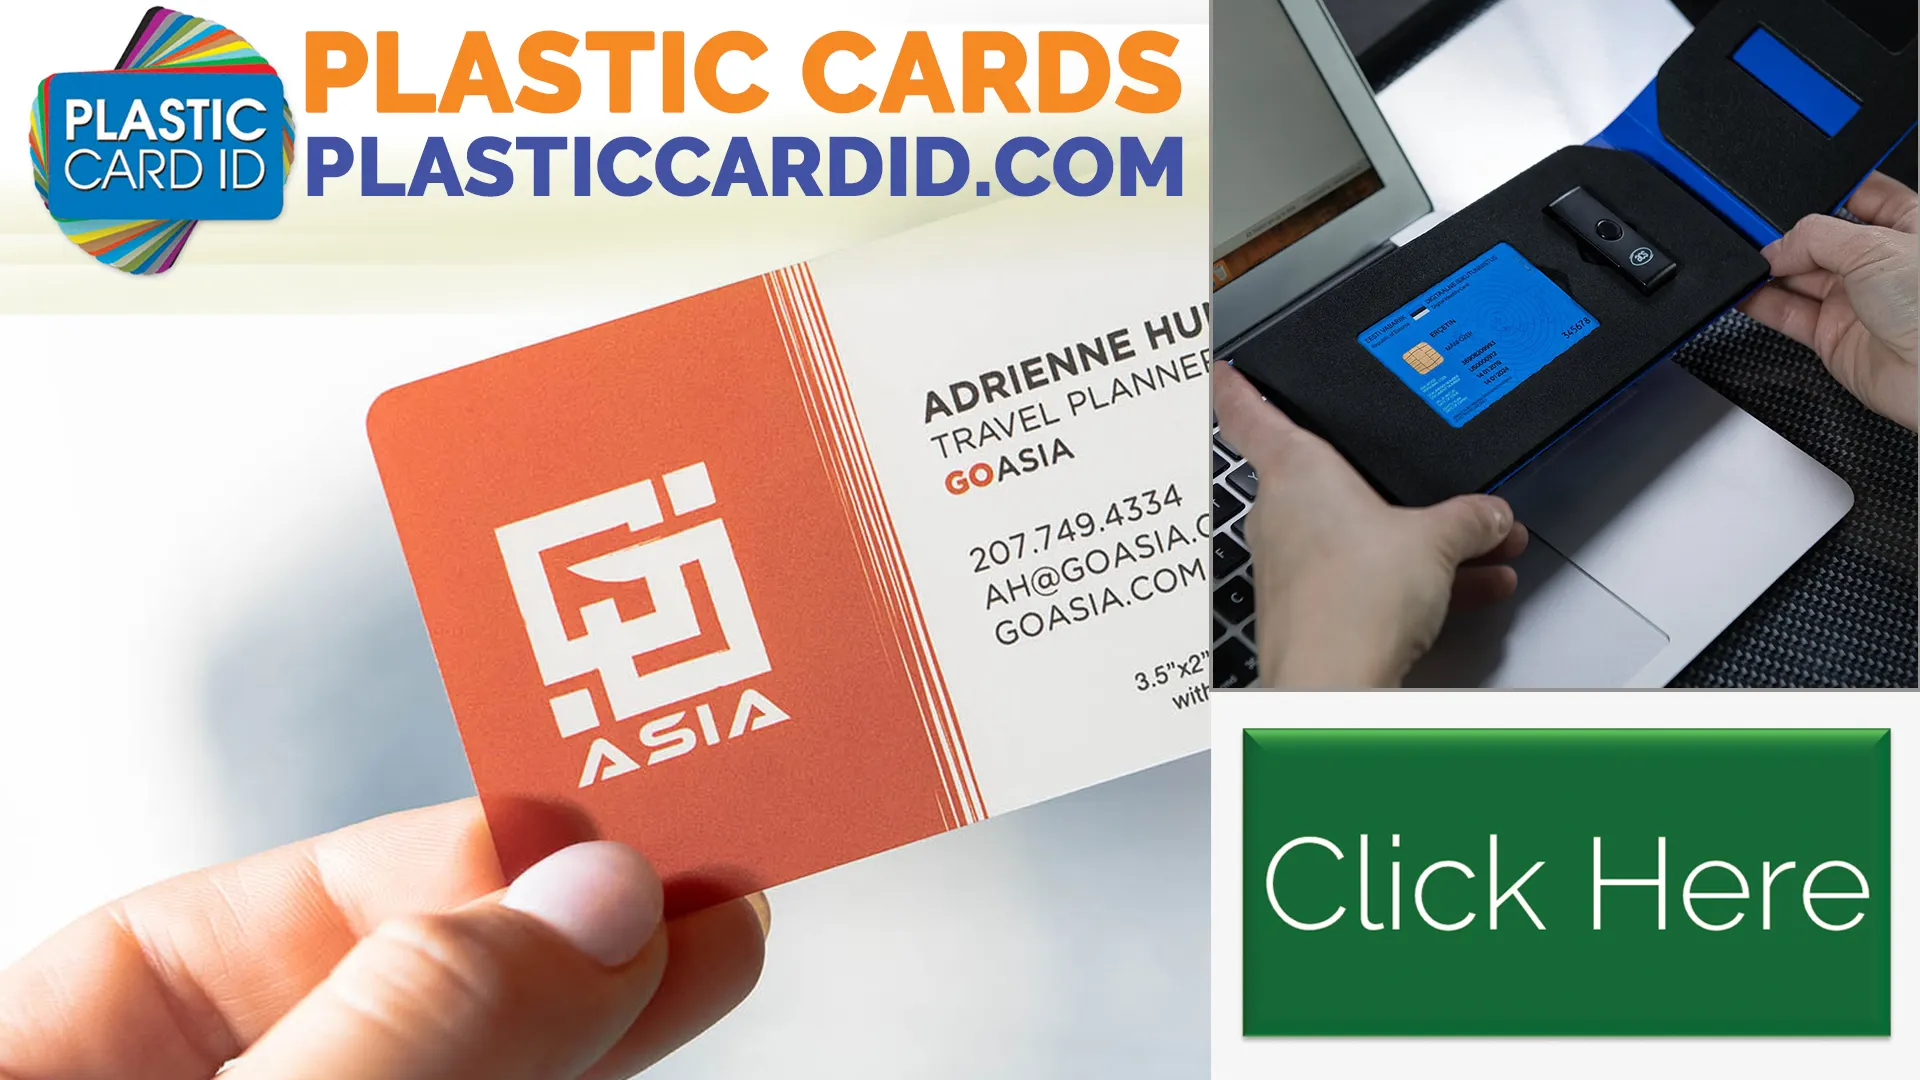 Finding the Perfect Plastic Card for Your Project